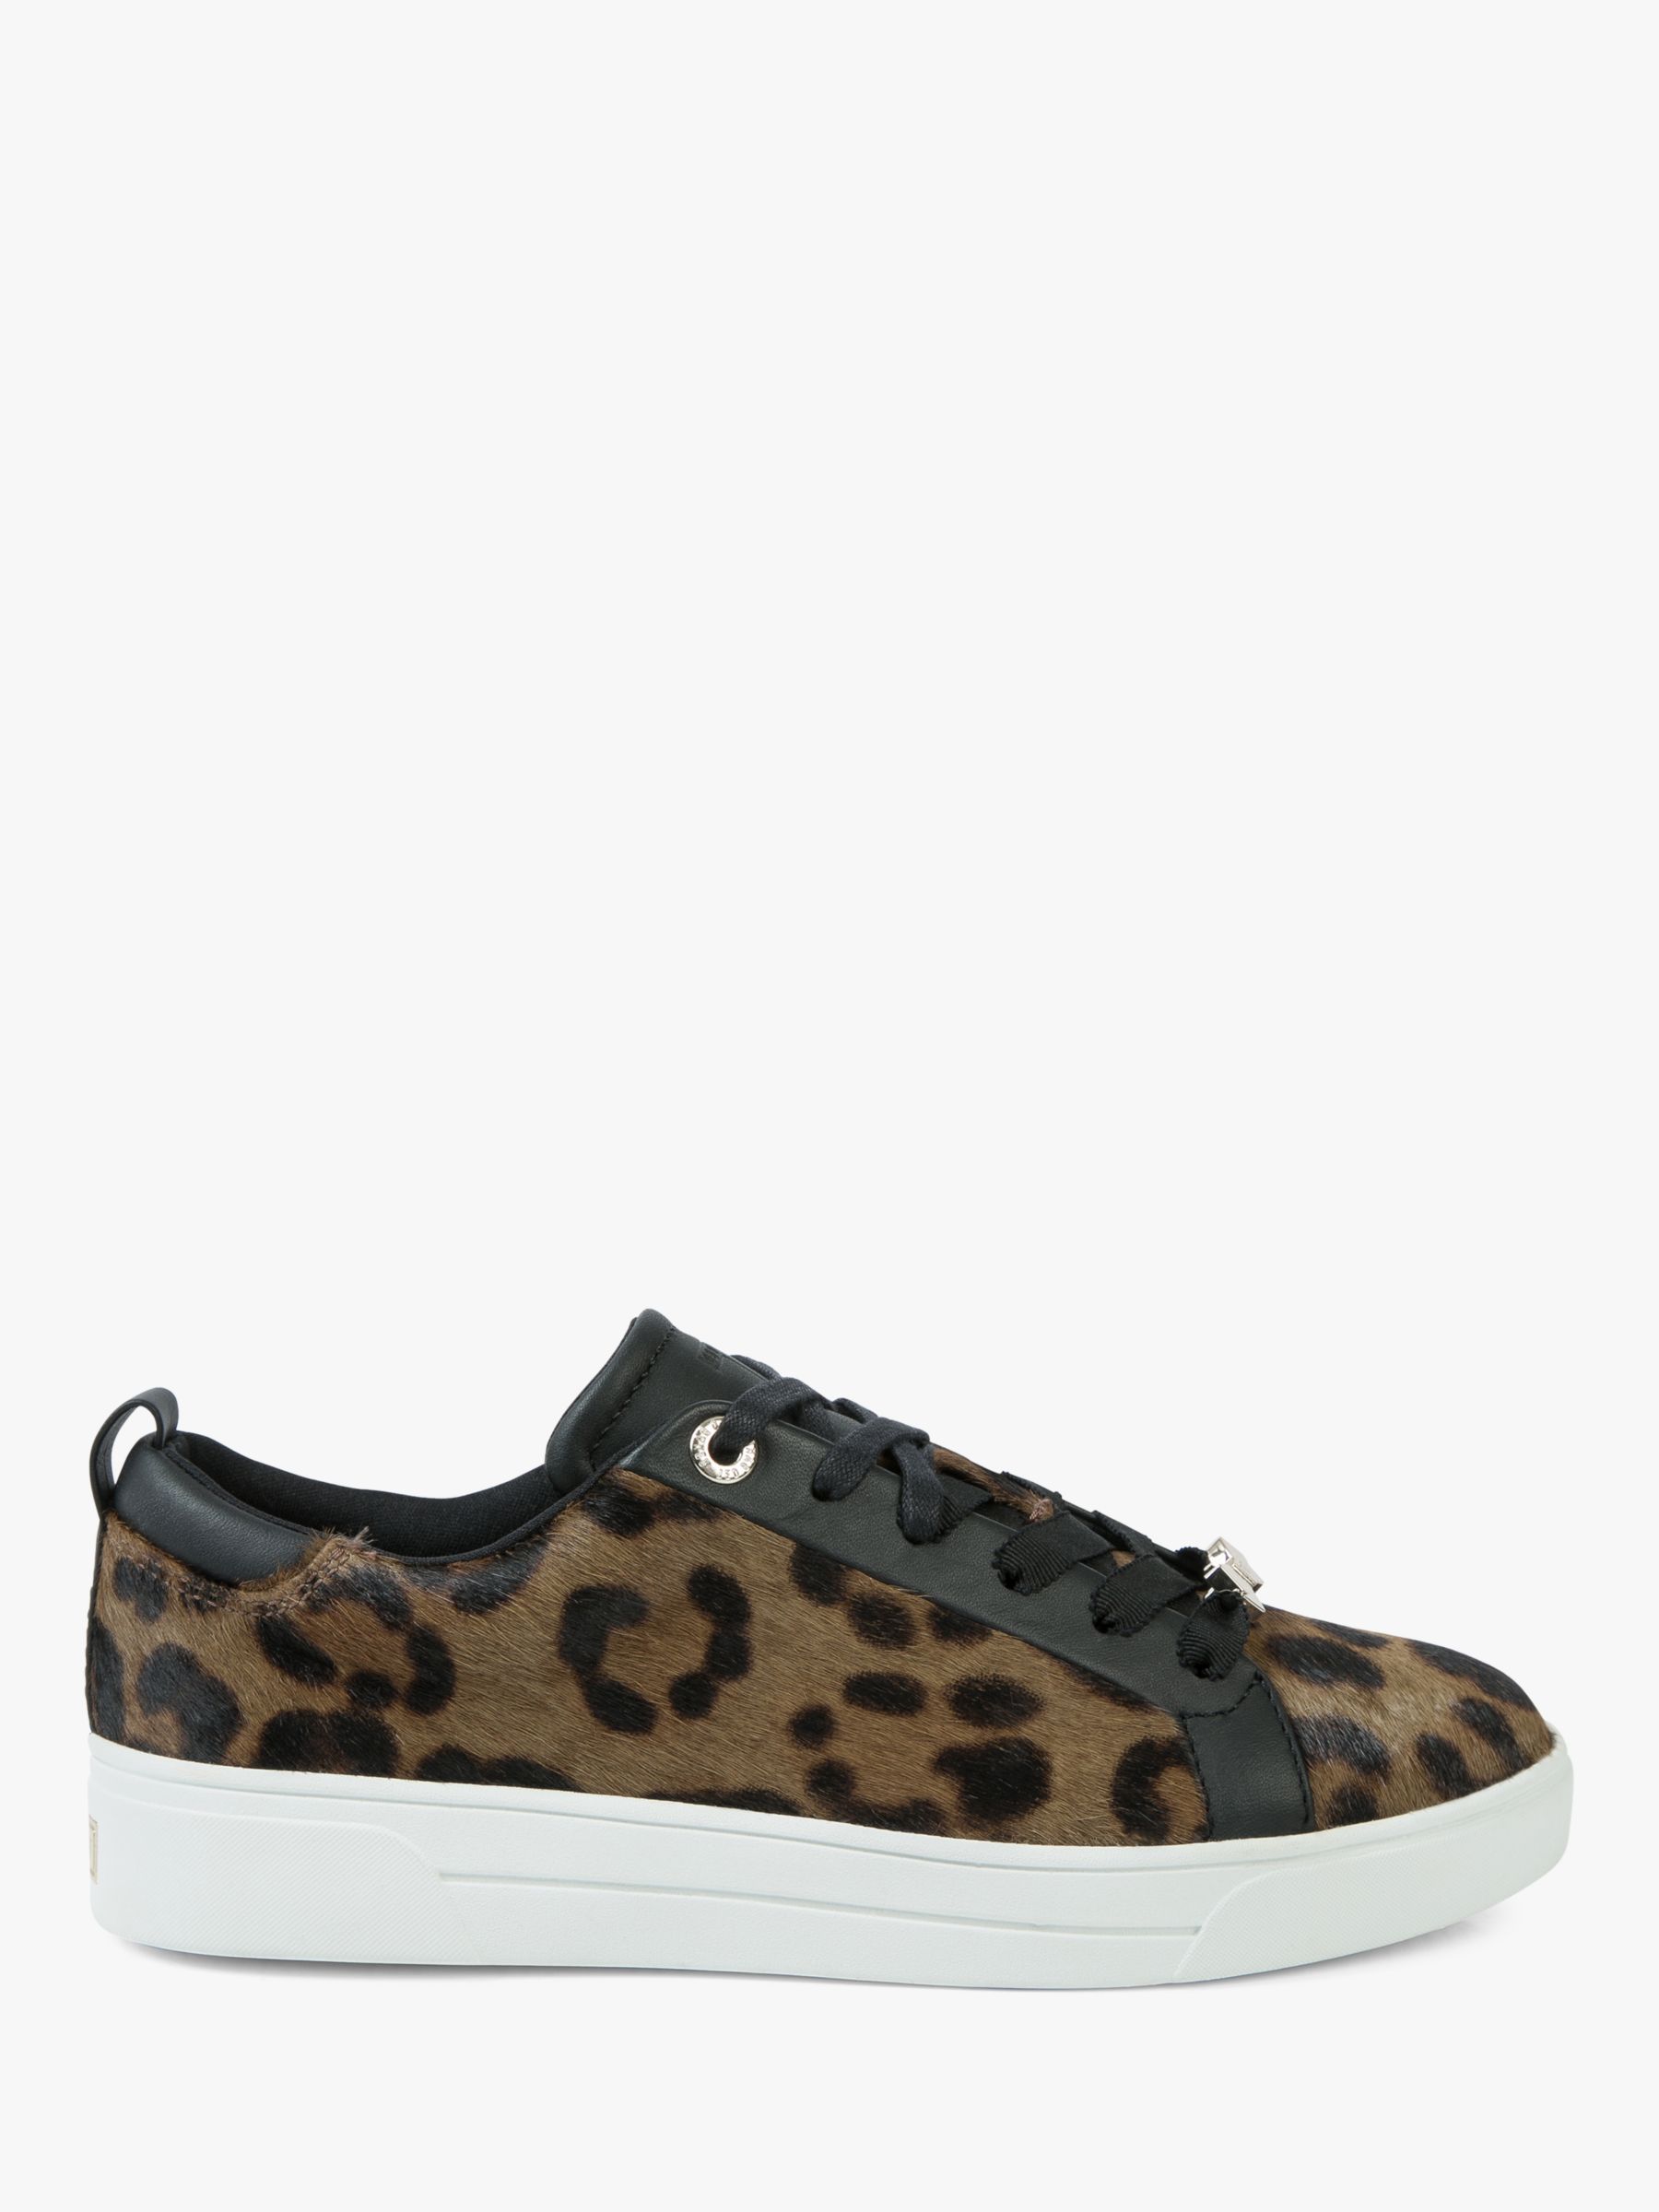 Ted Baker Elzseel Lace Up Trainers, Leopard Leather